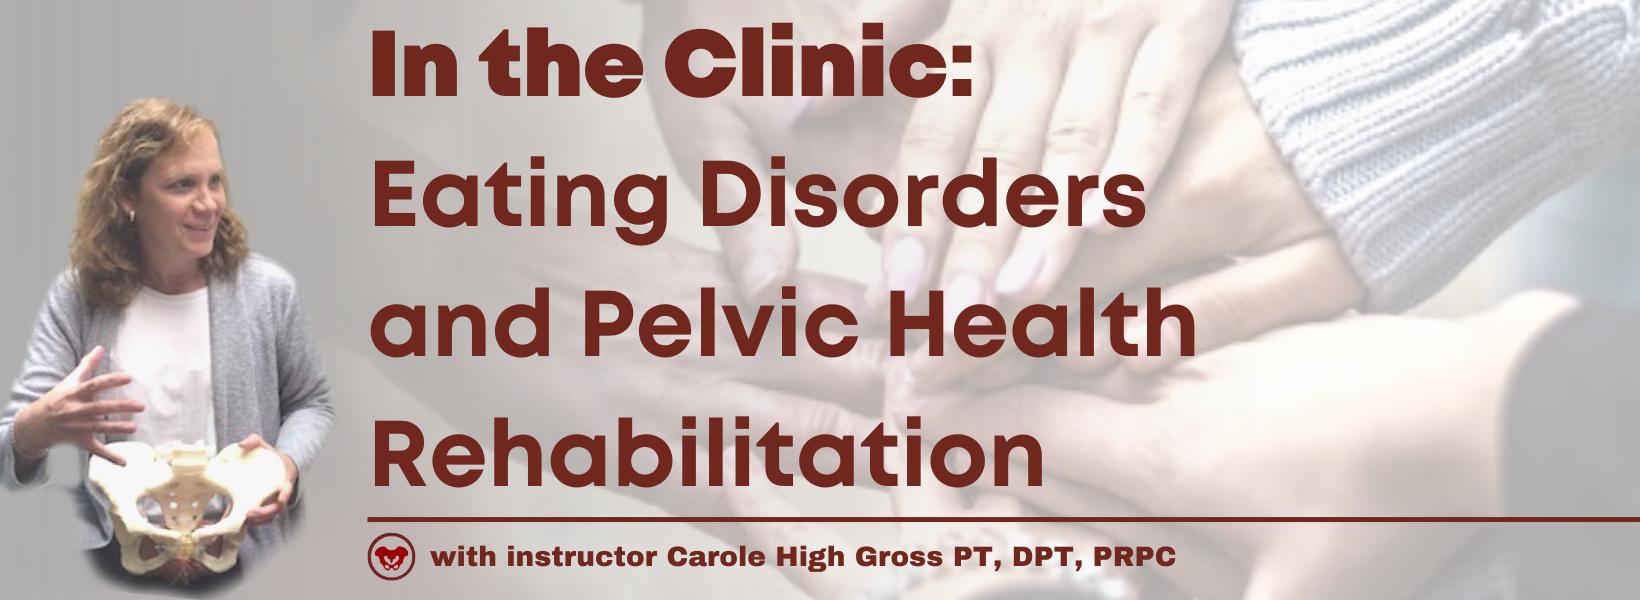 In The Clinic: Eating Disorders and Pelvic Health Rehabilitation